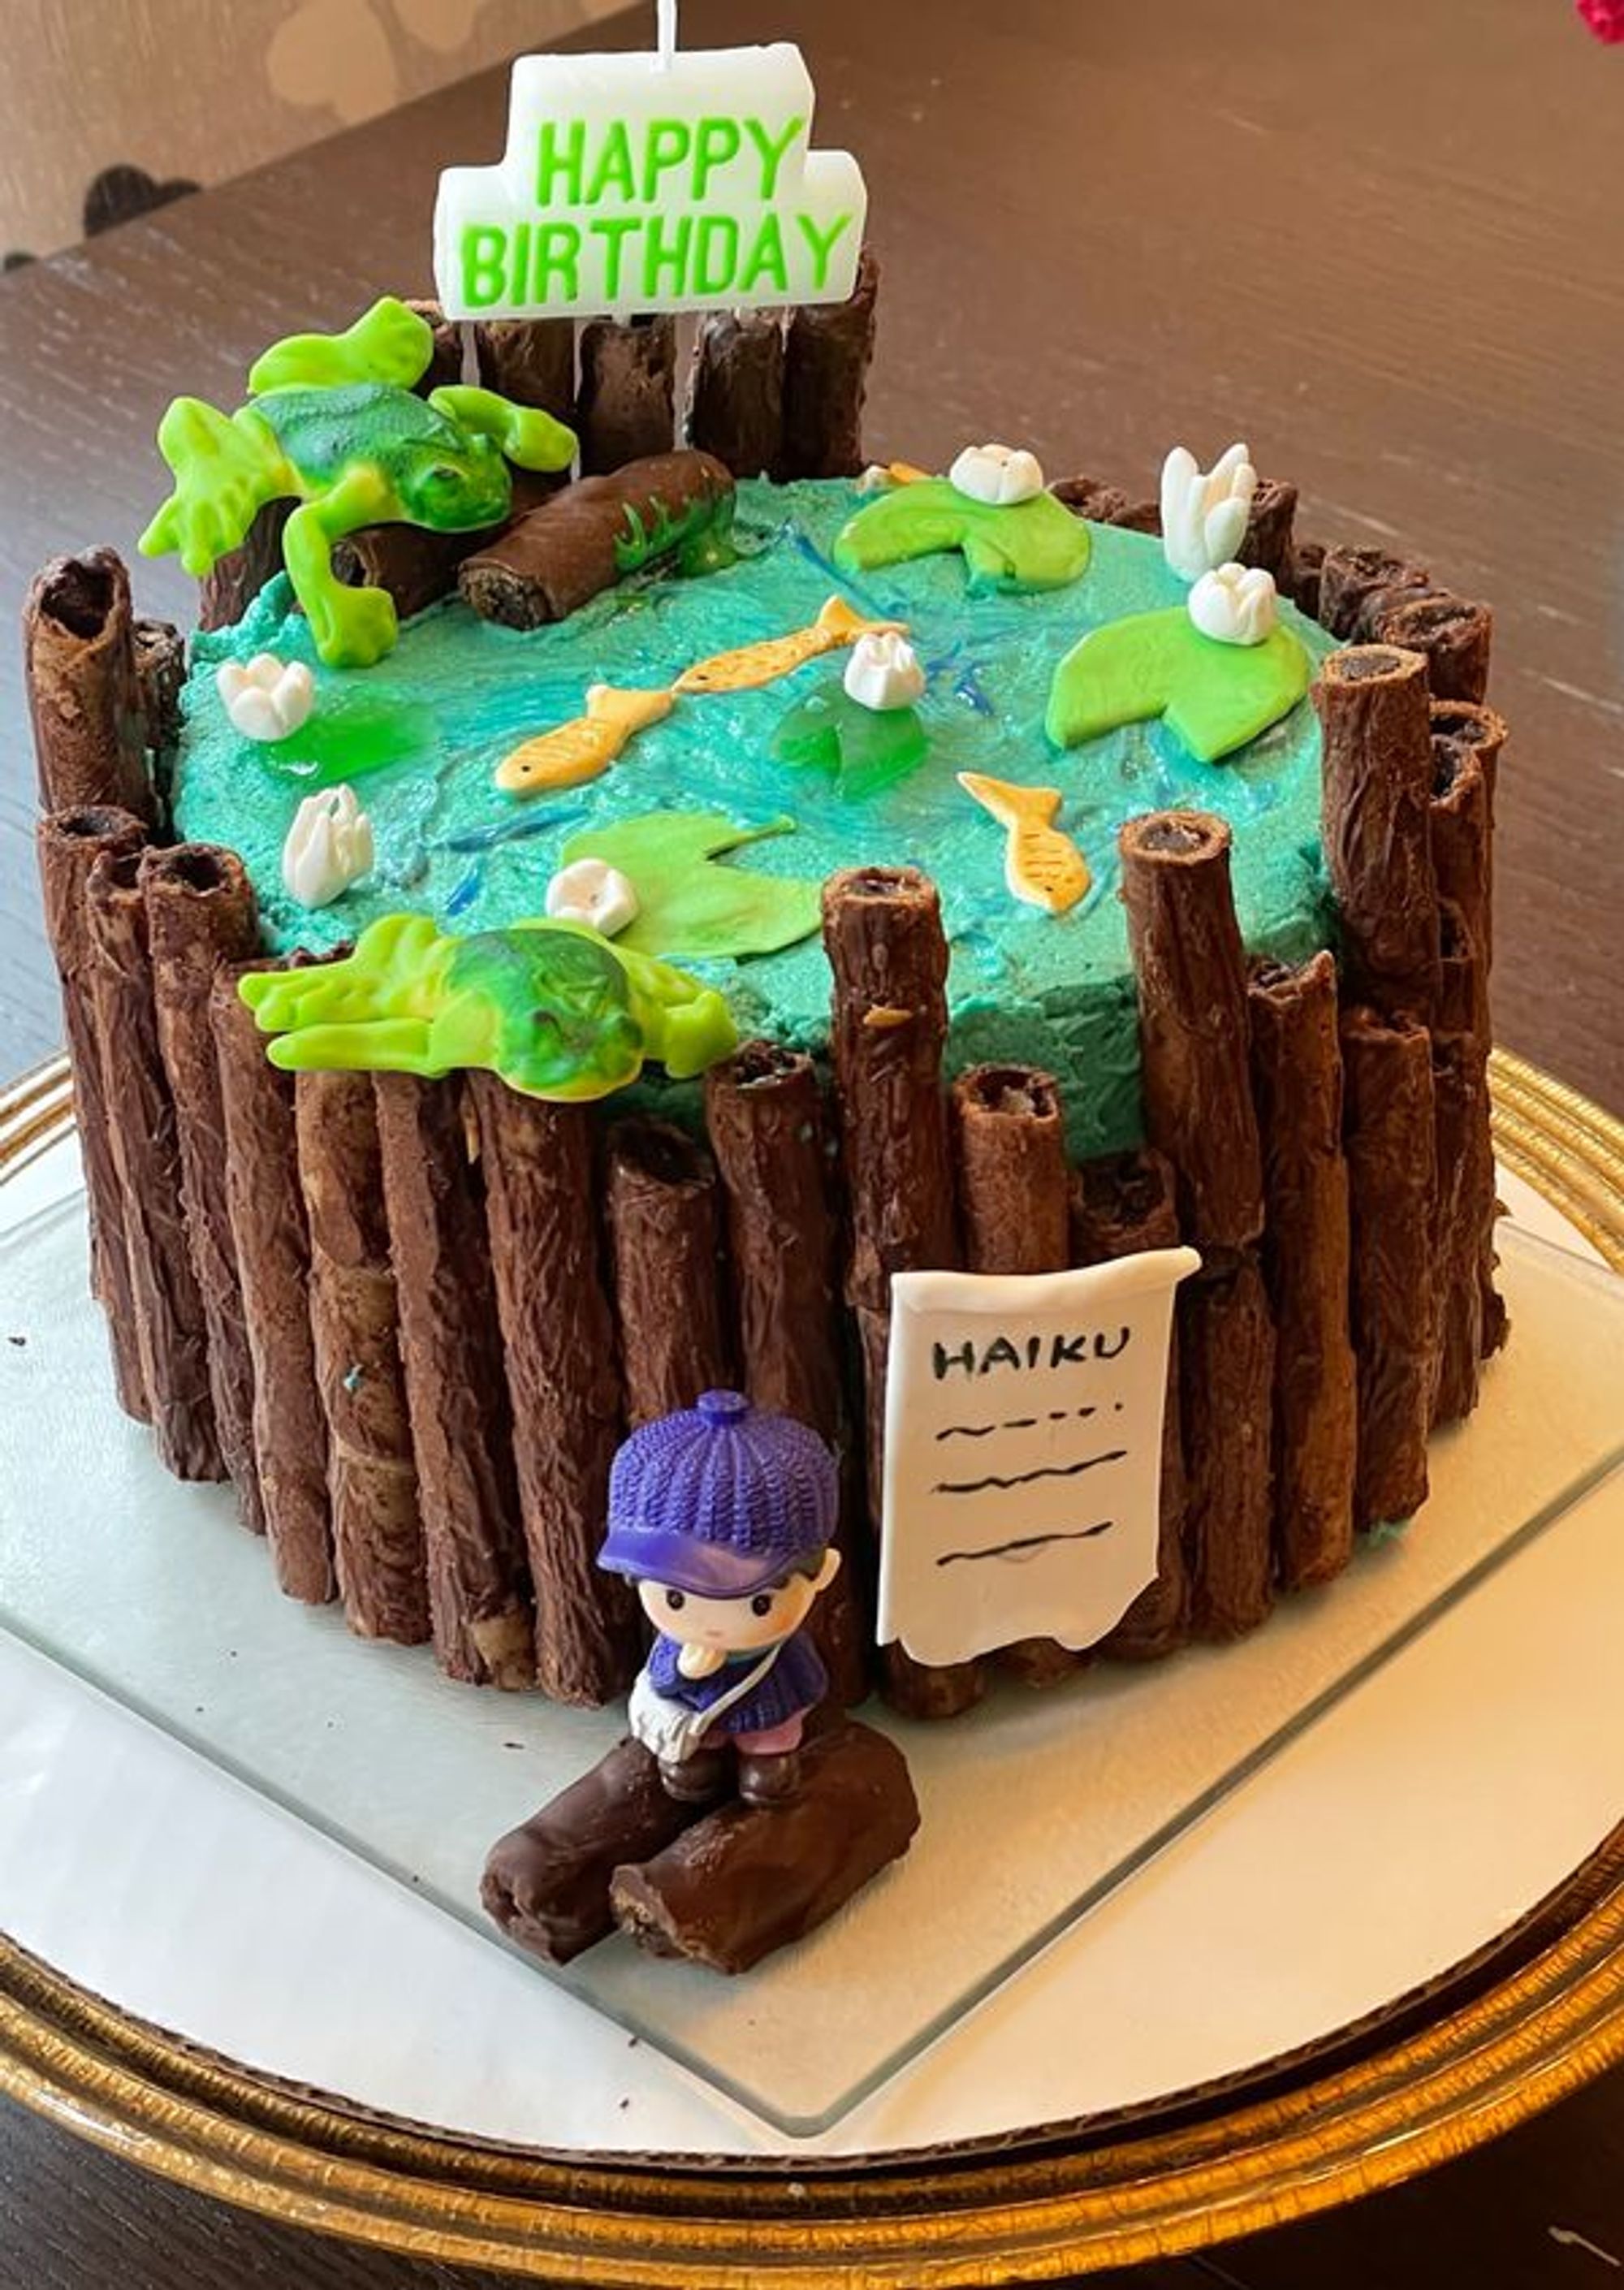 Haiku Cake and Garden: How an Engineer and a Graphic Designer Cultivated Community in Isolation